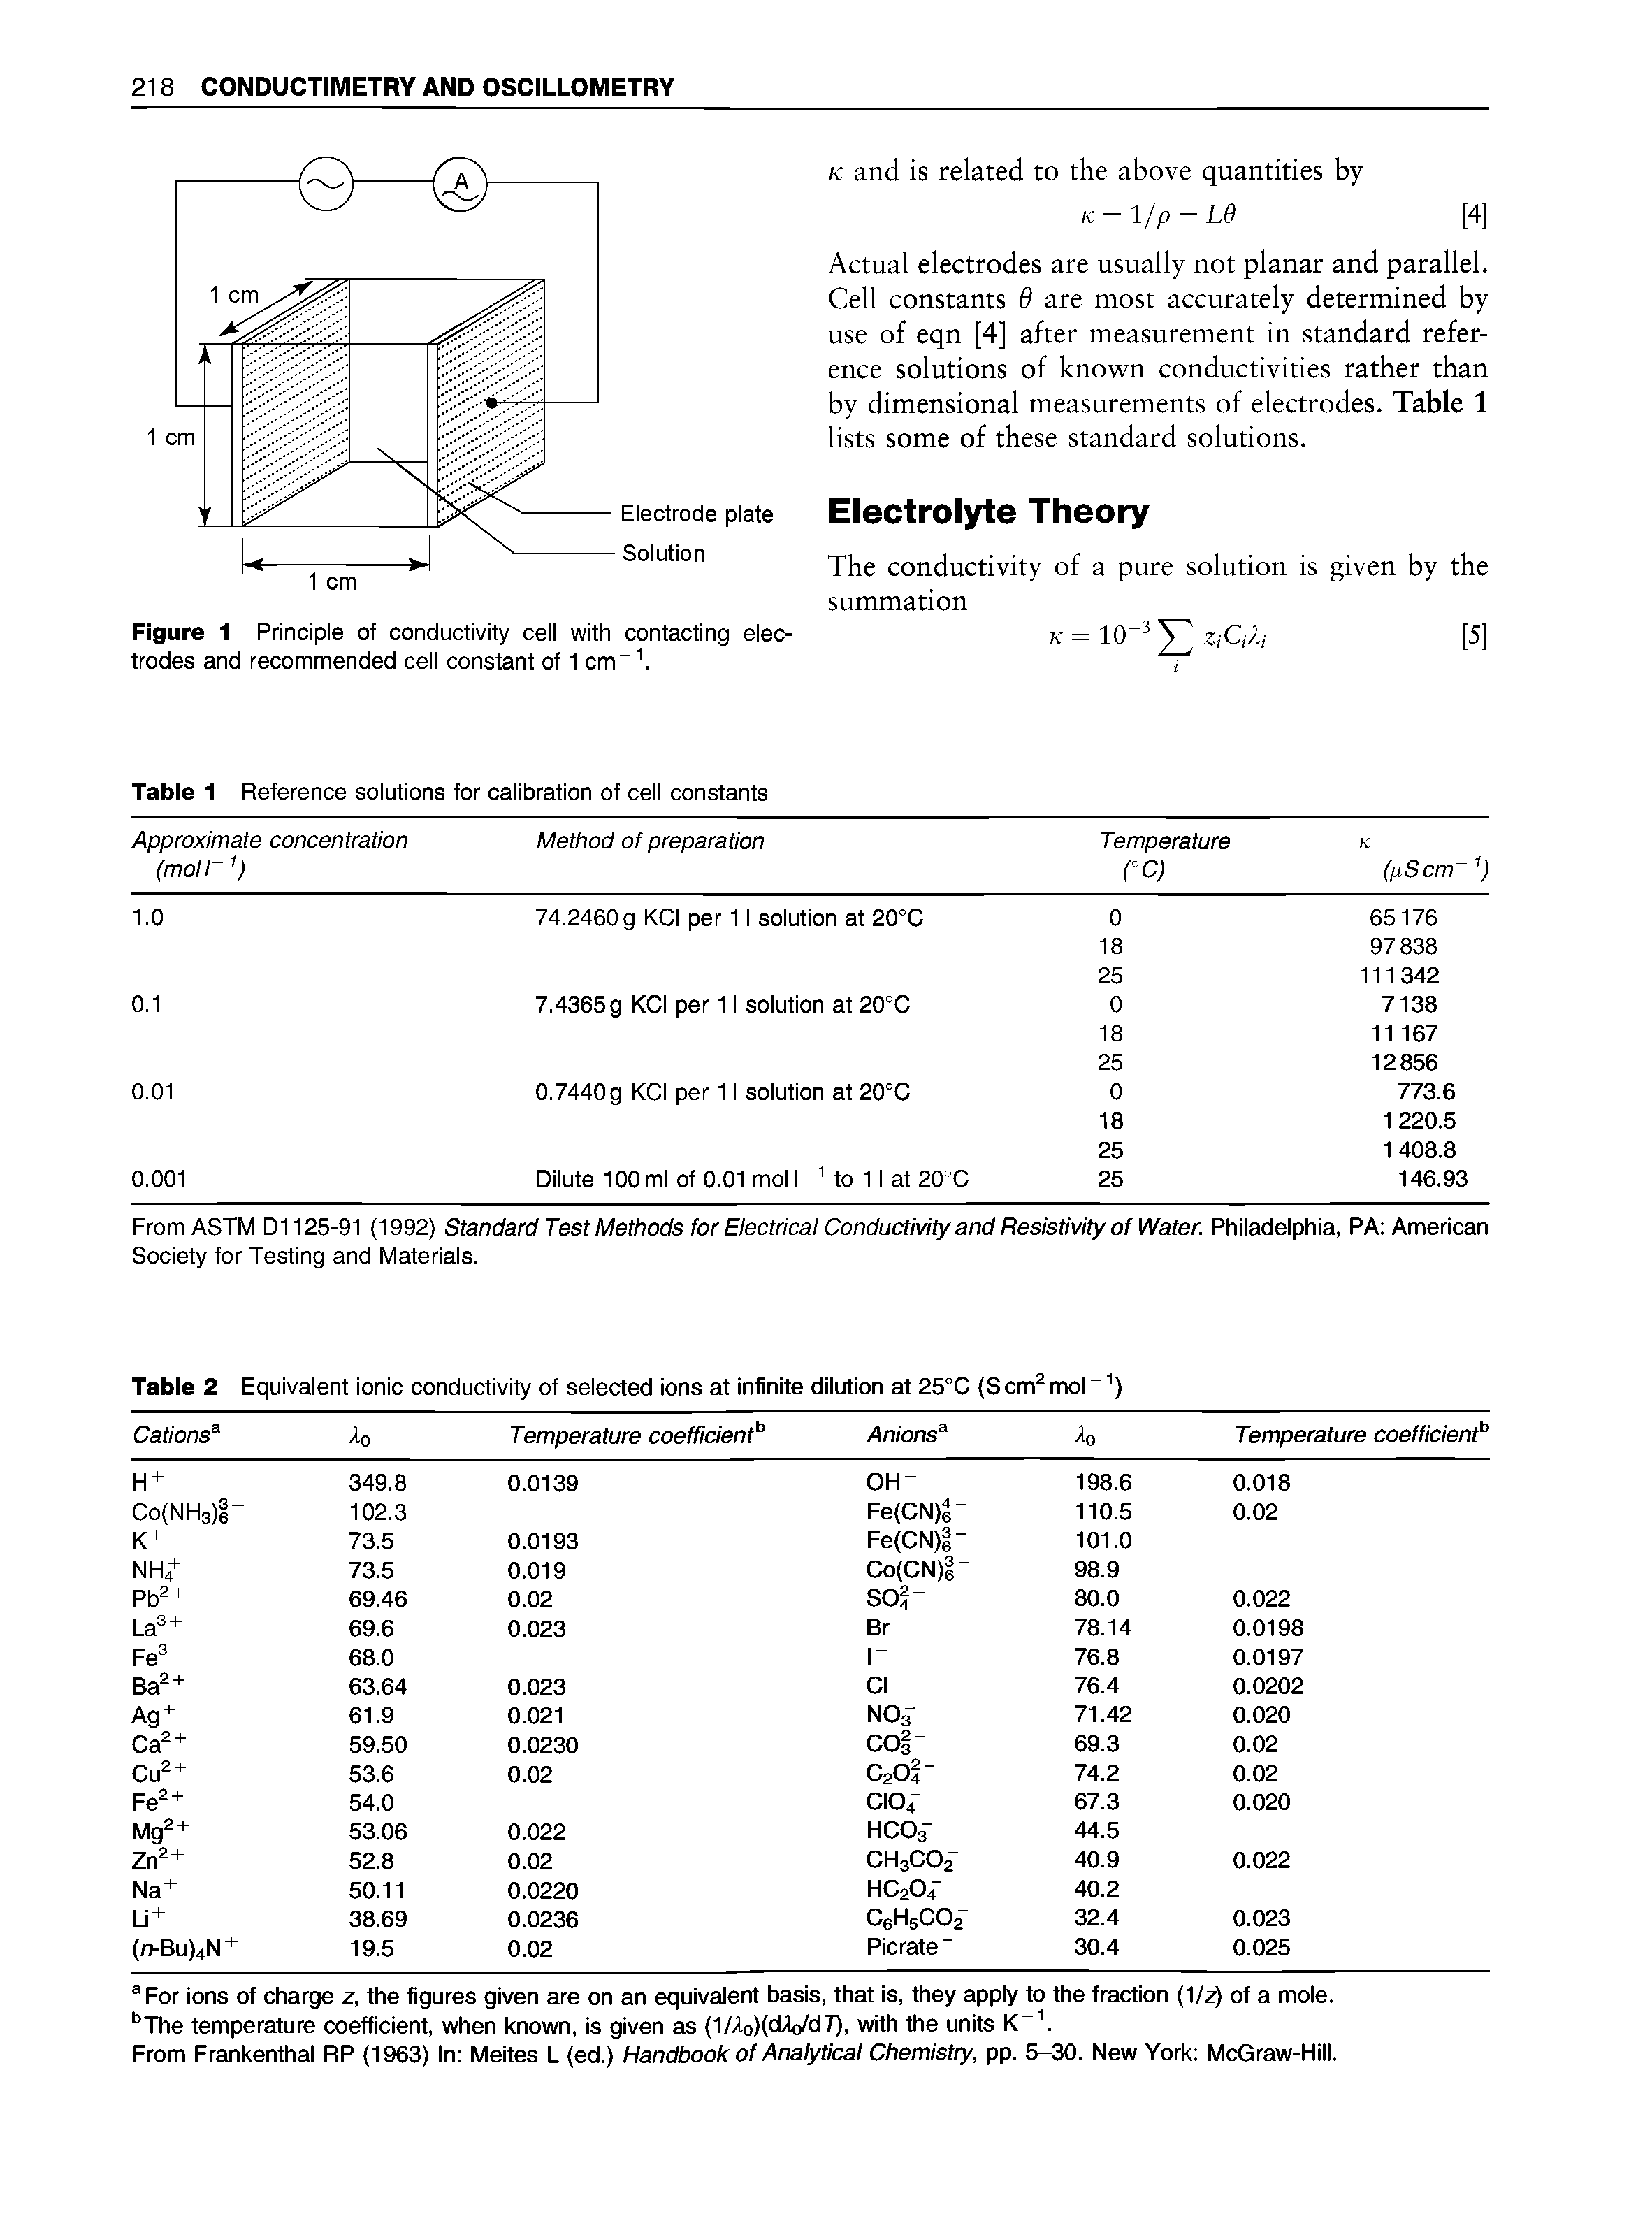 Table 2 Equivalent ionic conductivity of selected ions at infinite dilution at 25°C (Scm mol ) ...